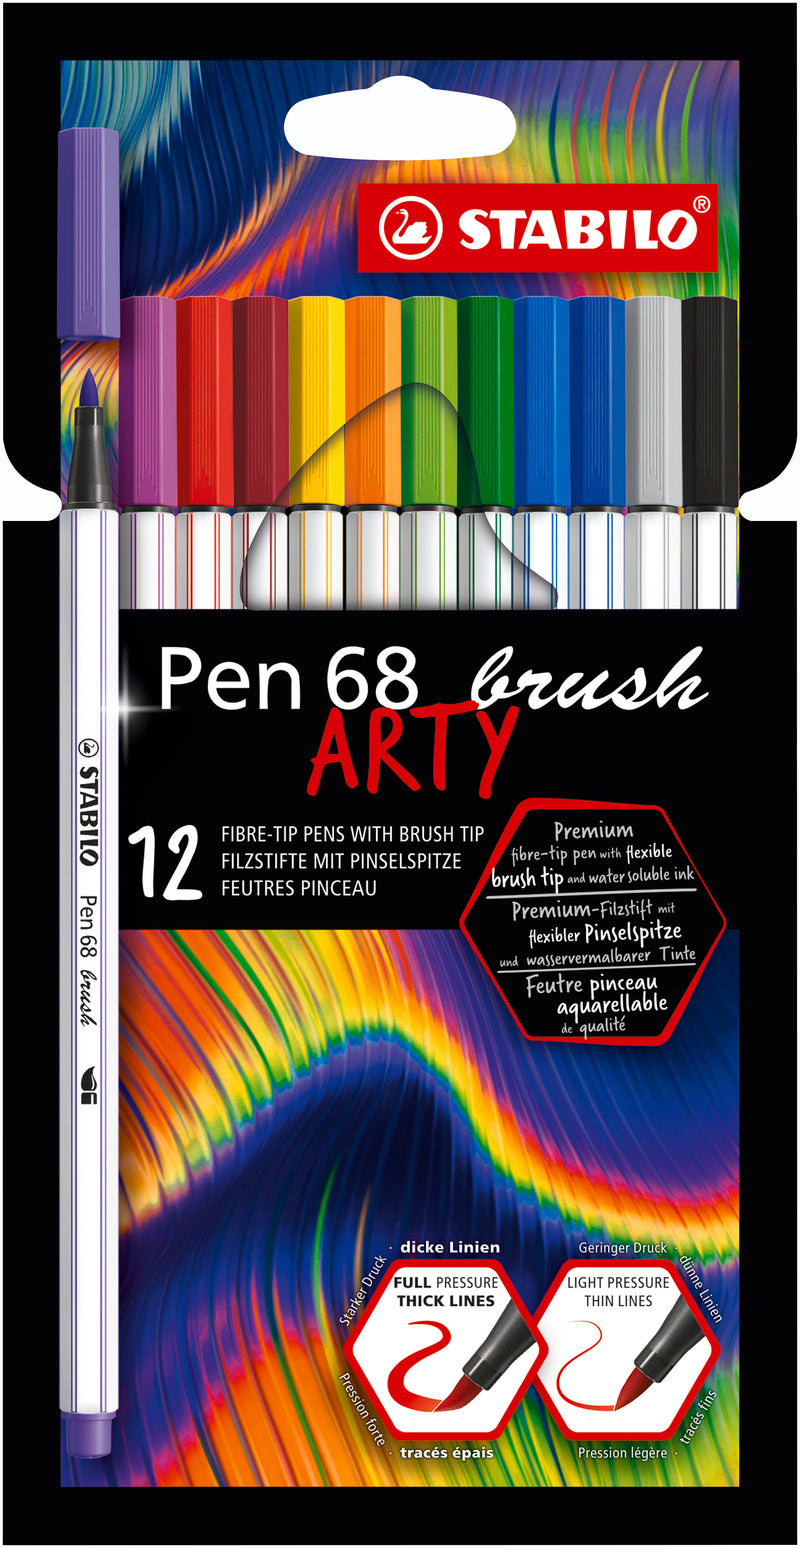 Pen 68 Brush ARTY - Pack of 12 - Assorted Colours